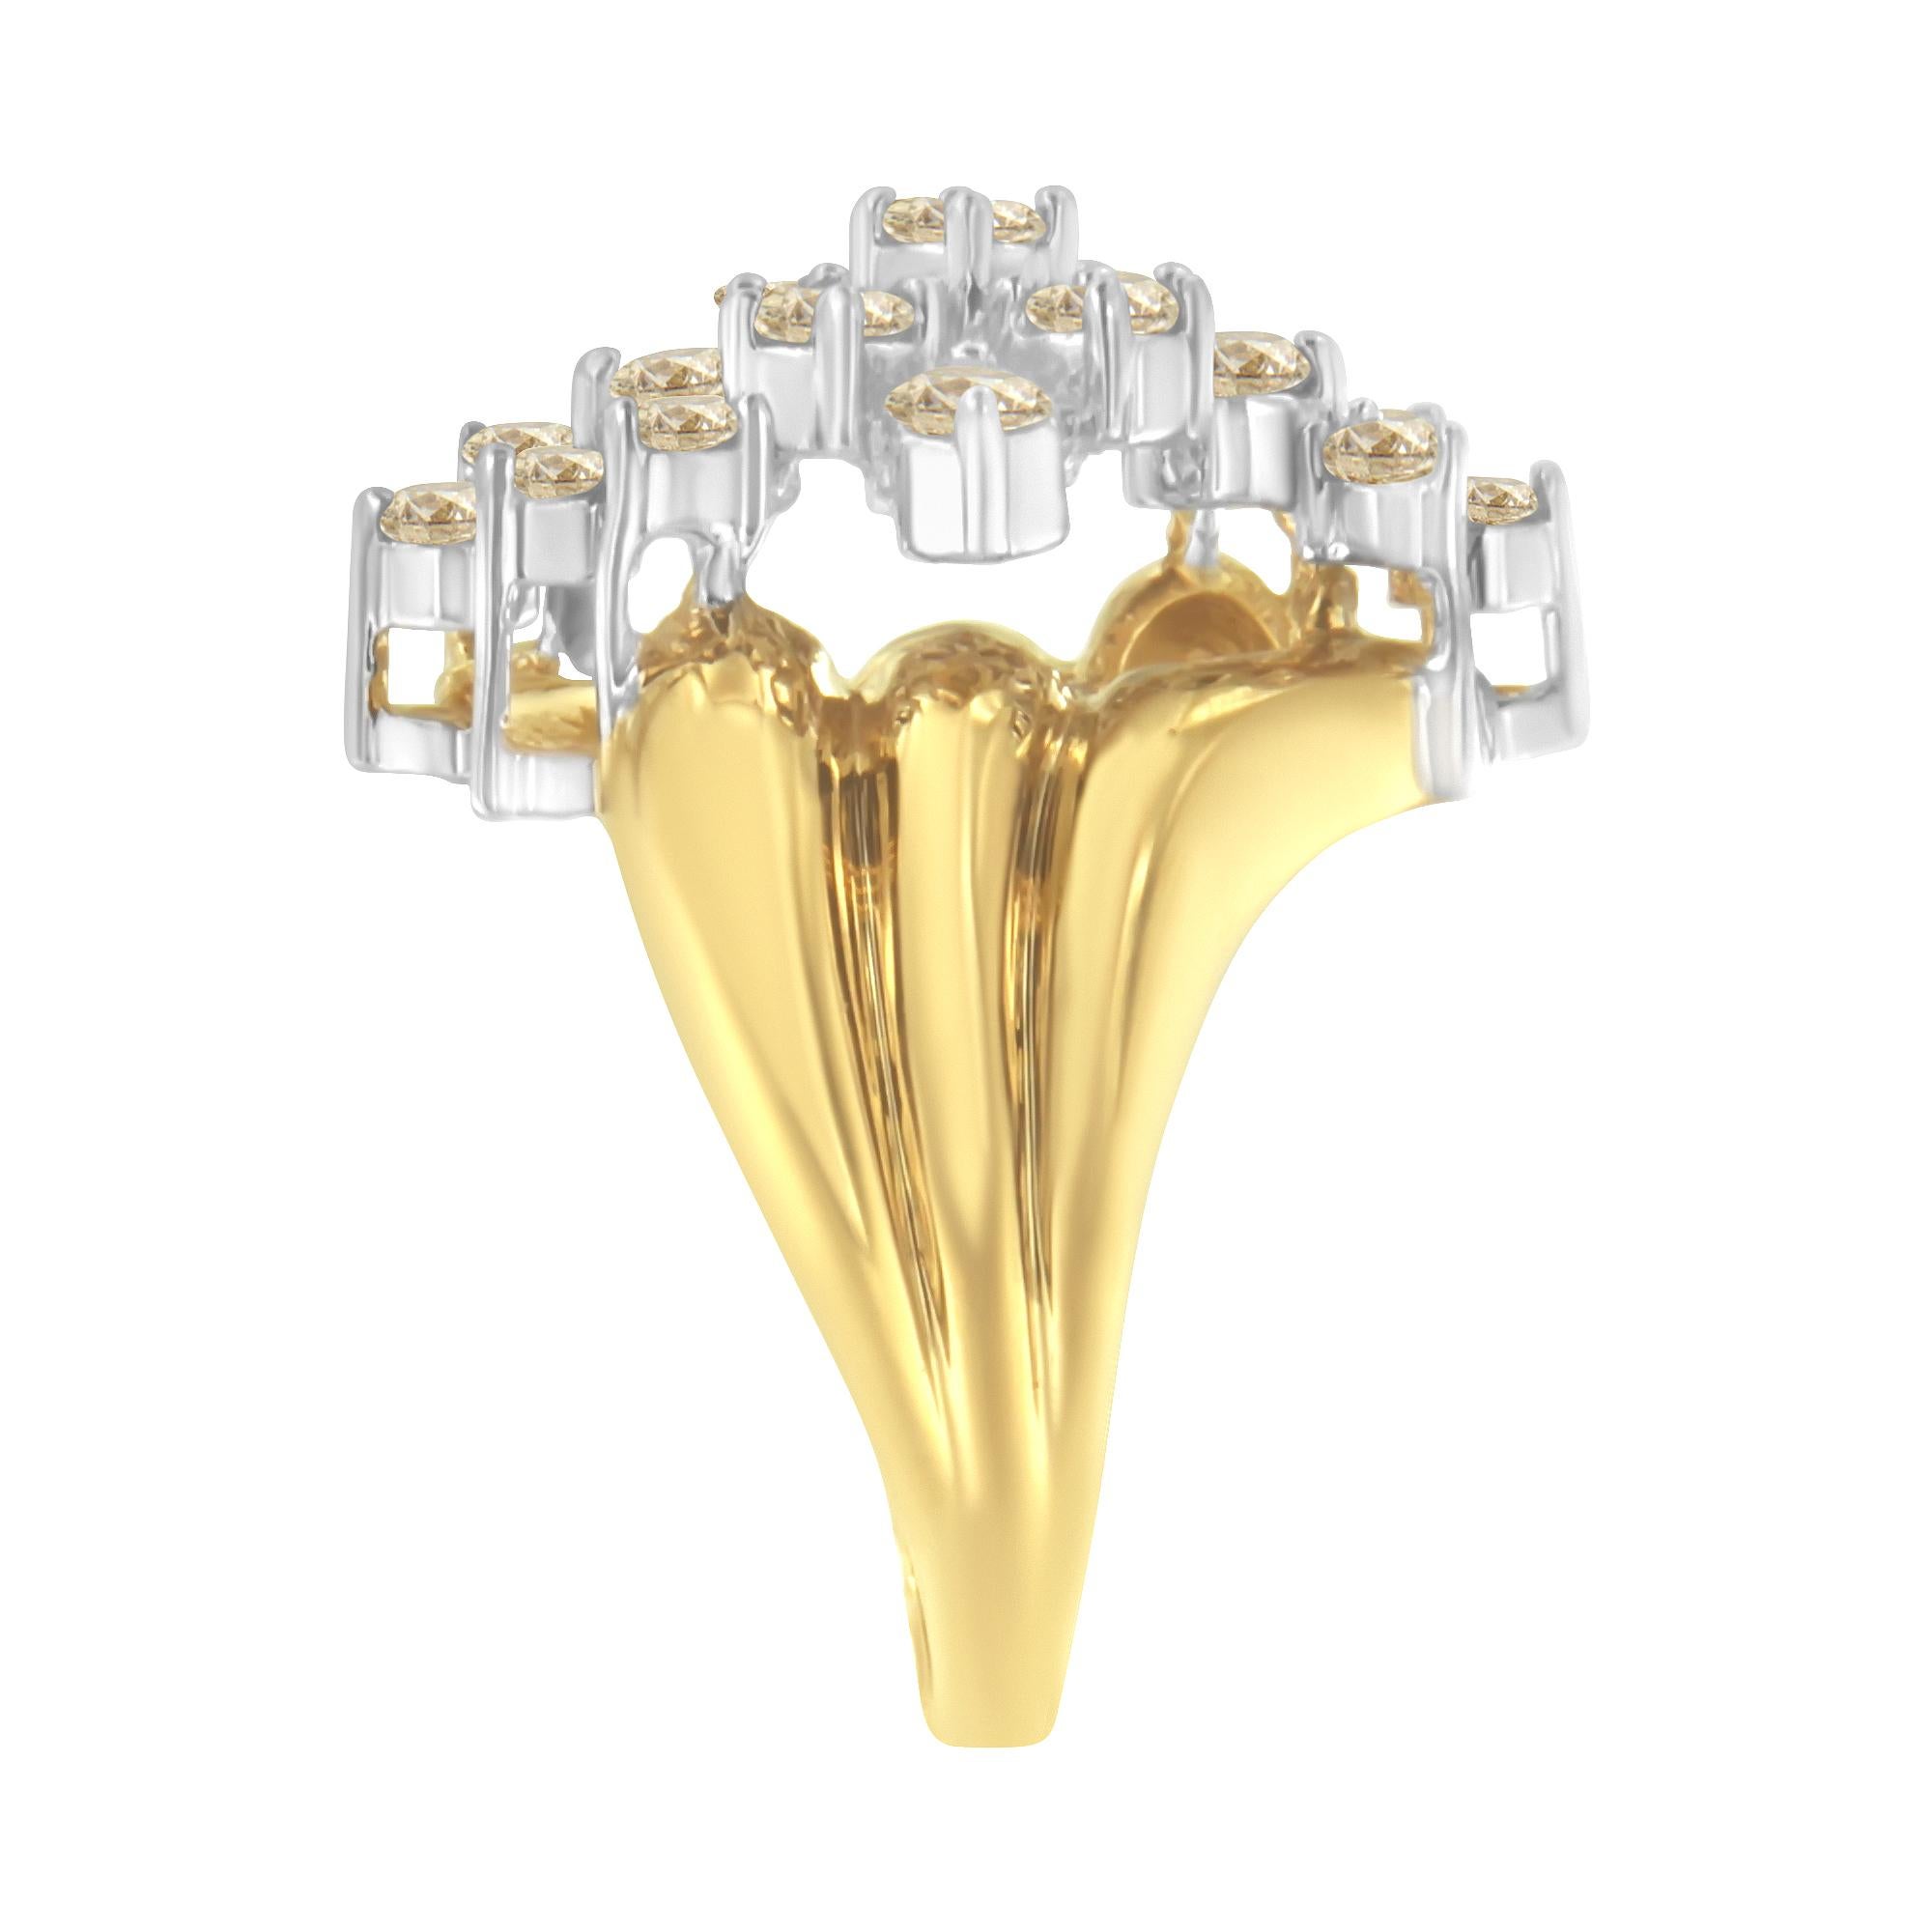 A diamond cluster ring crafted in yellow gold plated sterling silver. The design features a thick band mimicking three thin bands set, with asymmetrical clusters of diamonds. There are 17 total diamonds, with a total weight of 1.50 carats.

Product